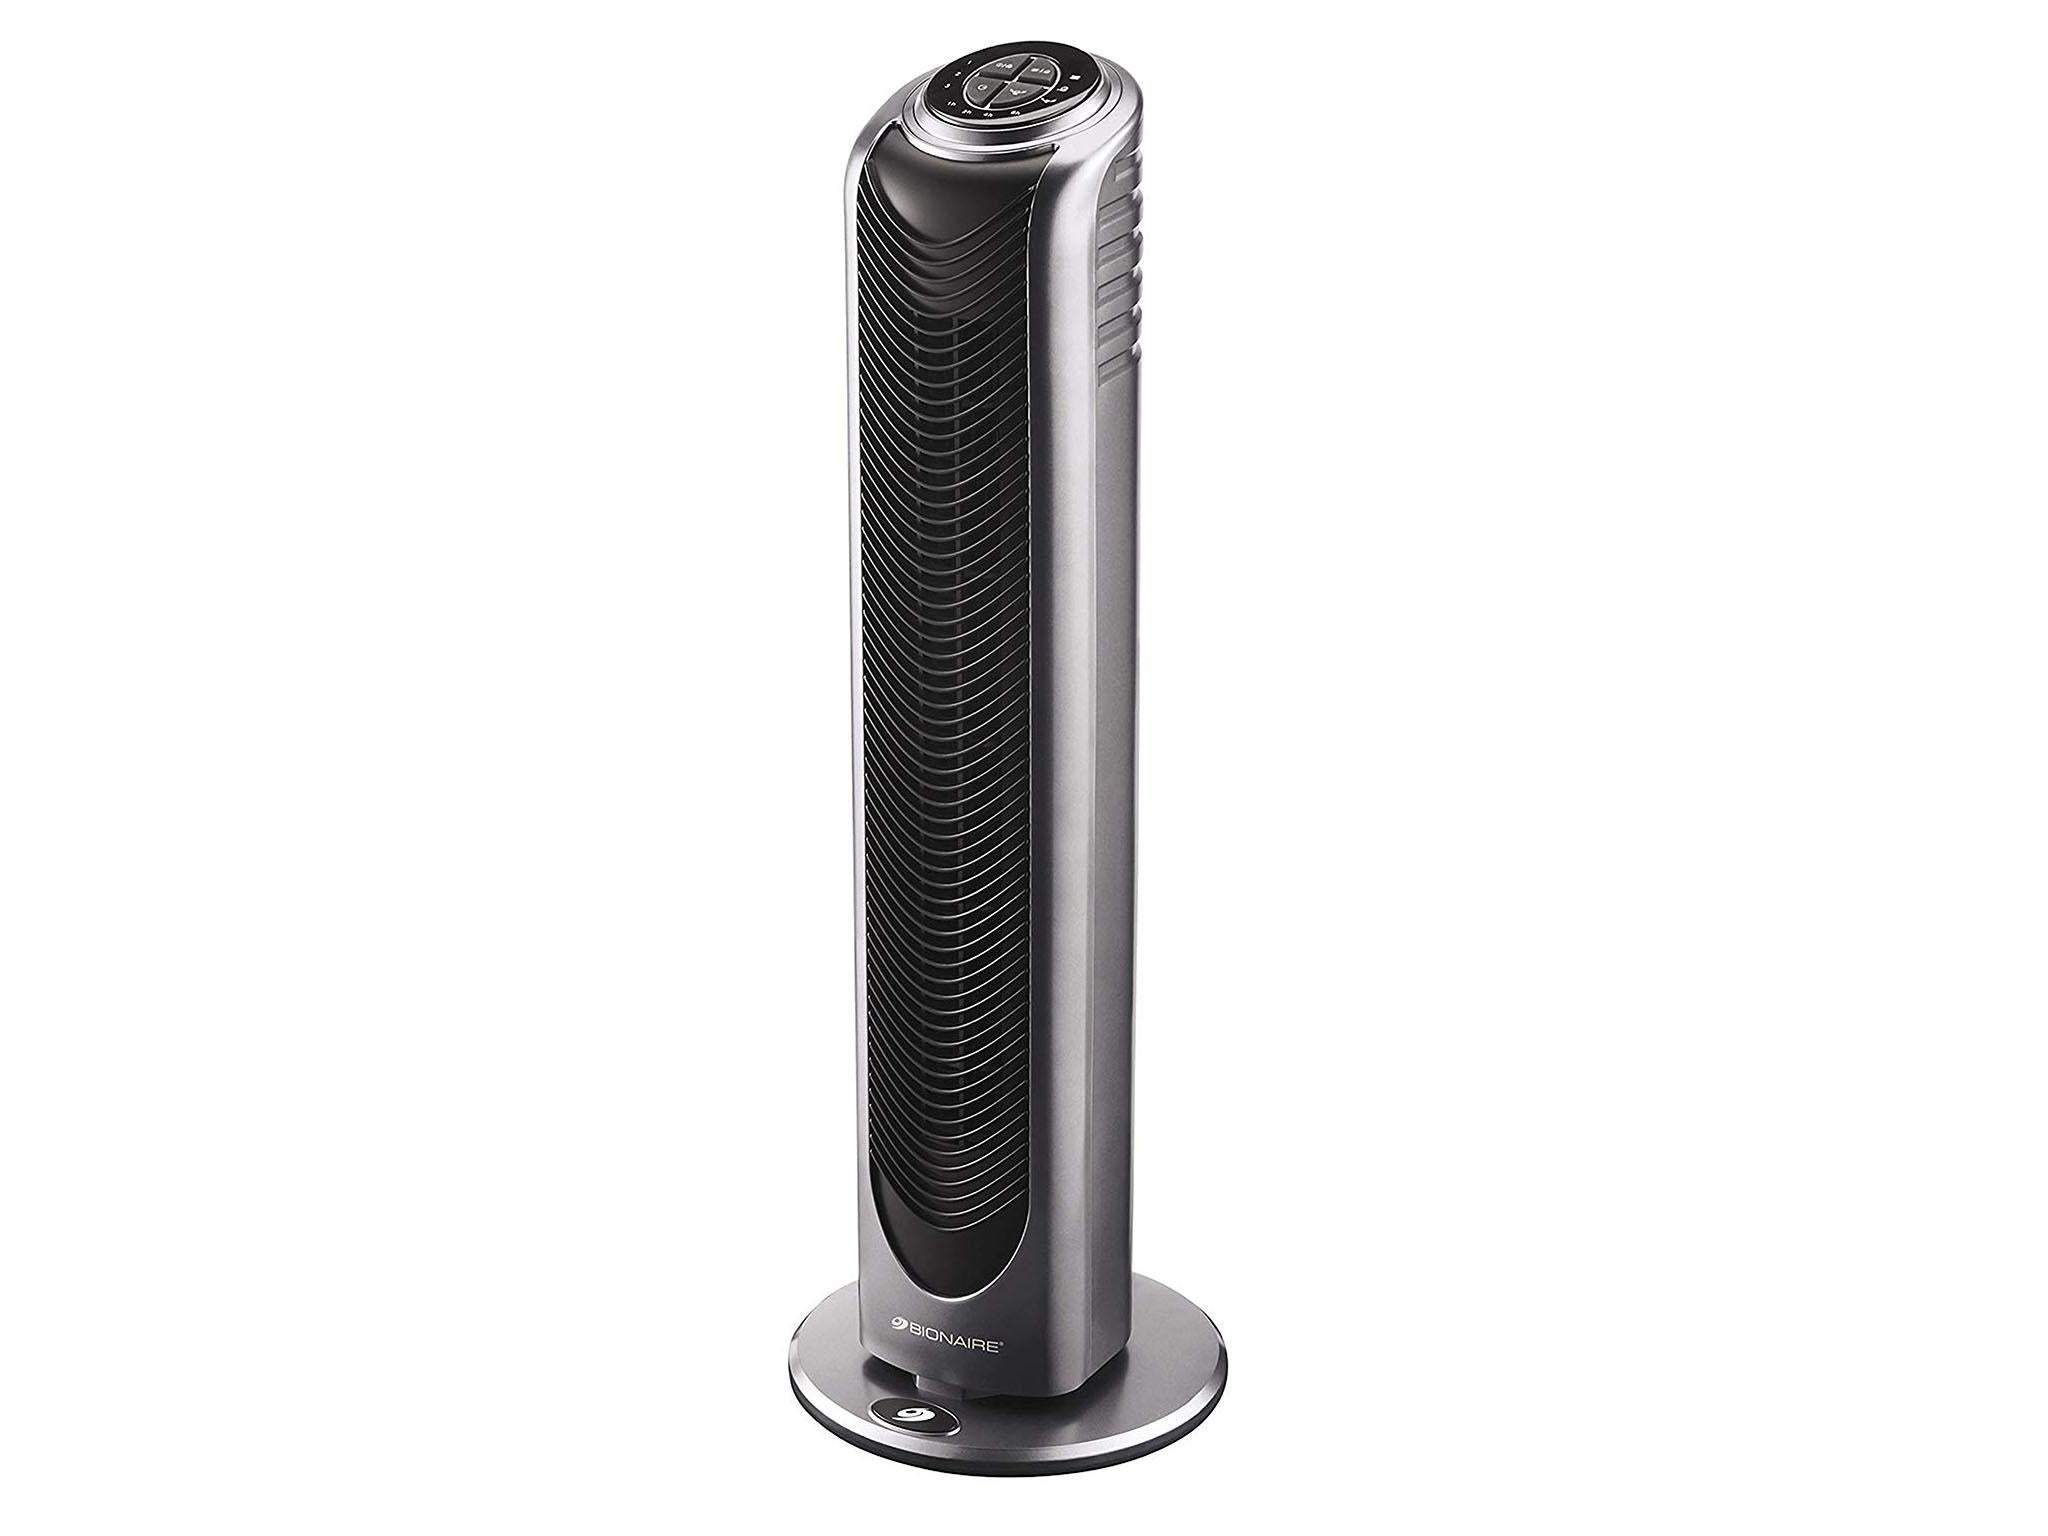 Httpsstaticindependentcouks3fs Publicthumbnailsimage2019060510bionaire Ocillating Tower Fan With Remote Control And Timer regarding dimensions 2048 X 1536